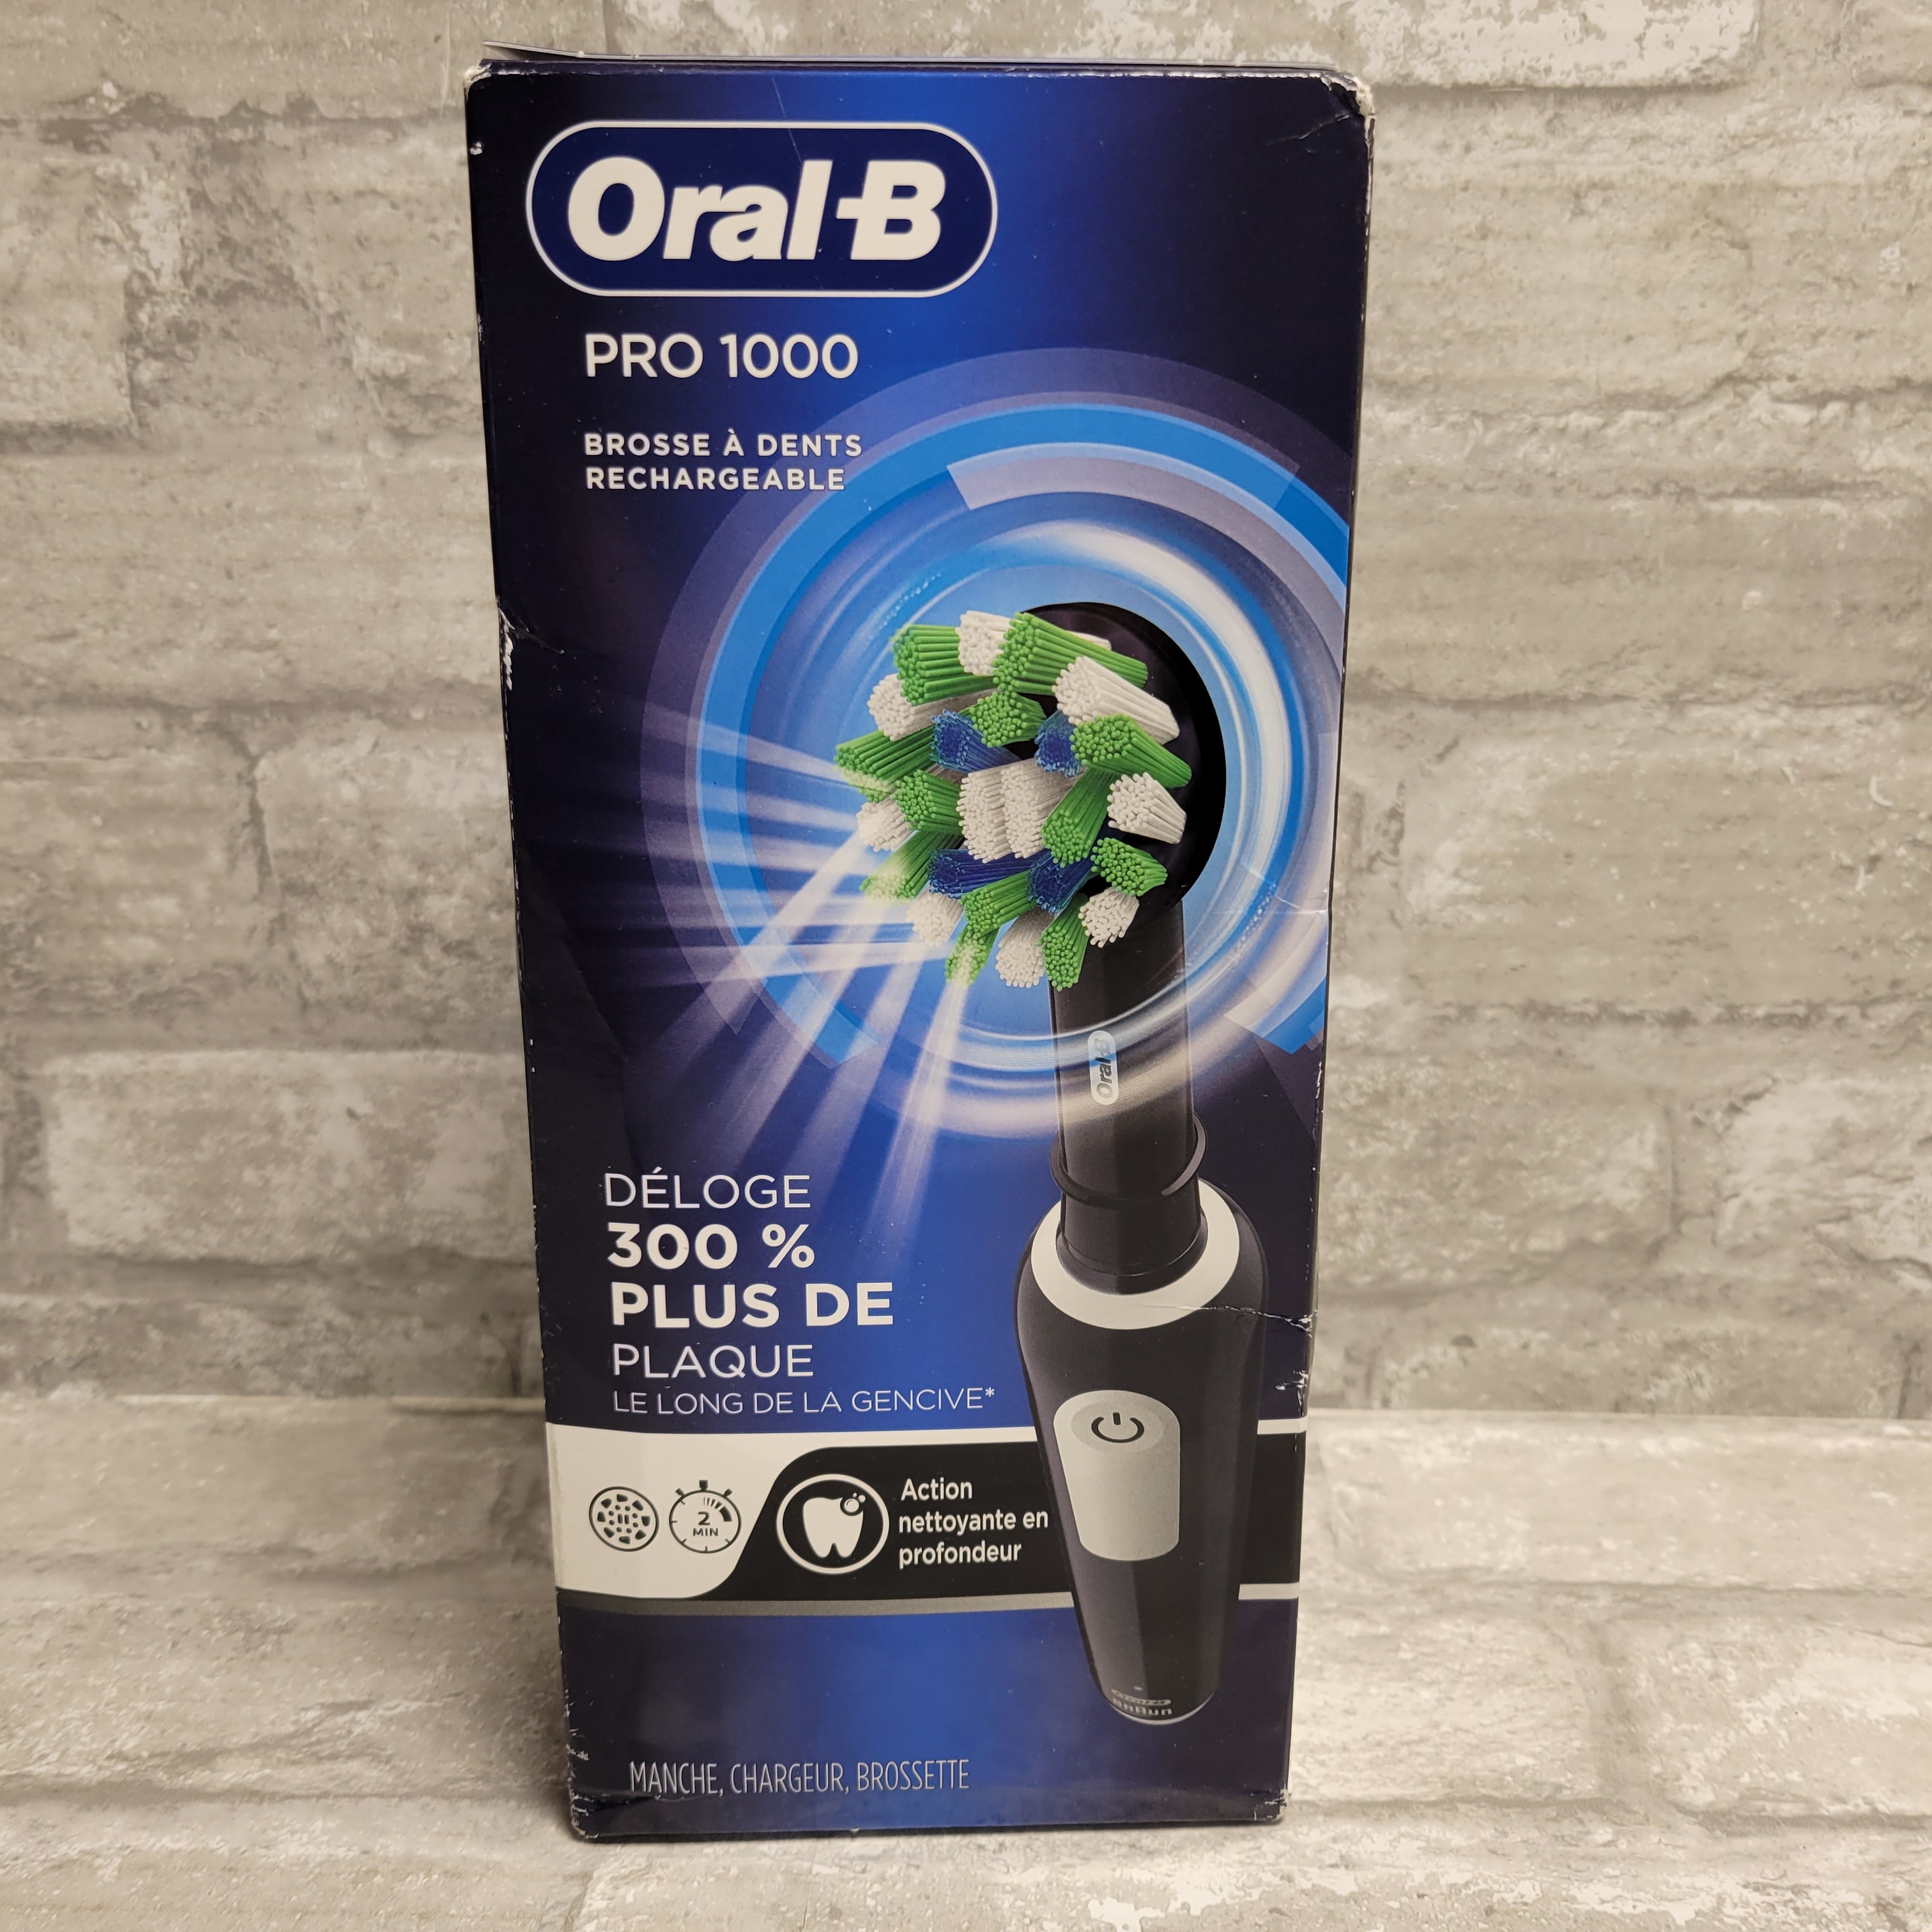 Oral-B PRO 1000 Rechargeable Toothbrush Deep Cleaning, Black (8038524977390)